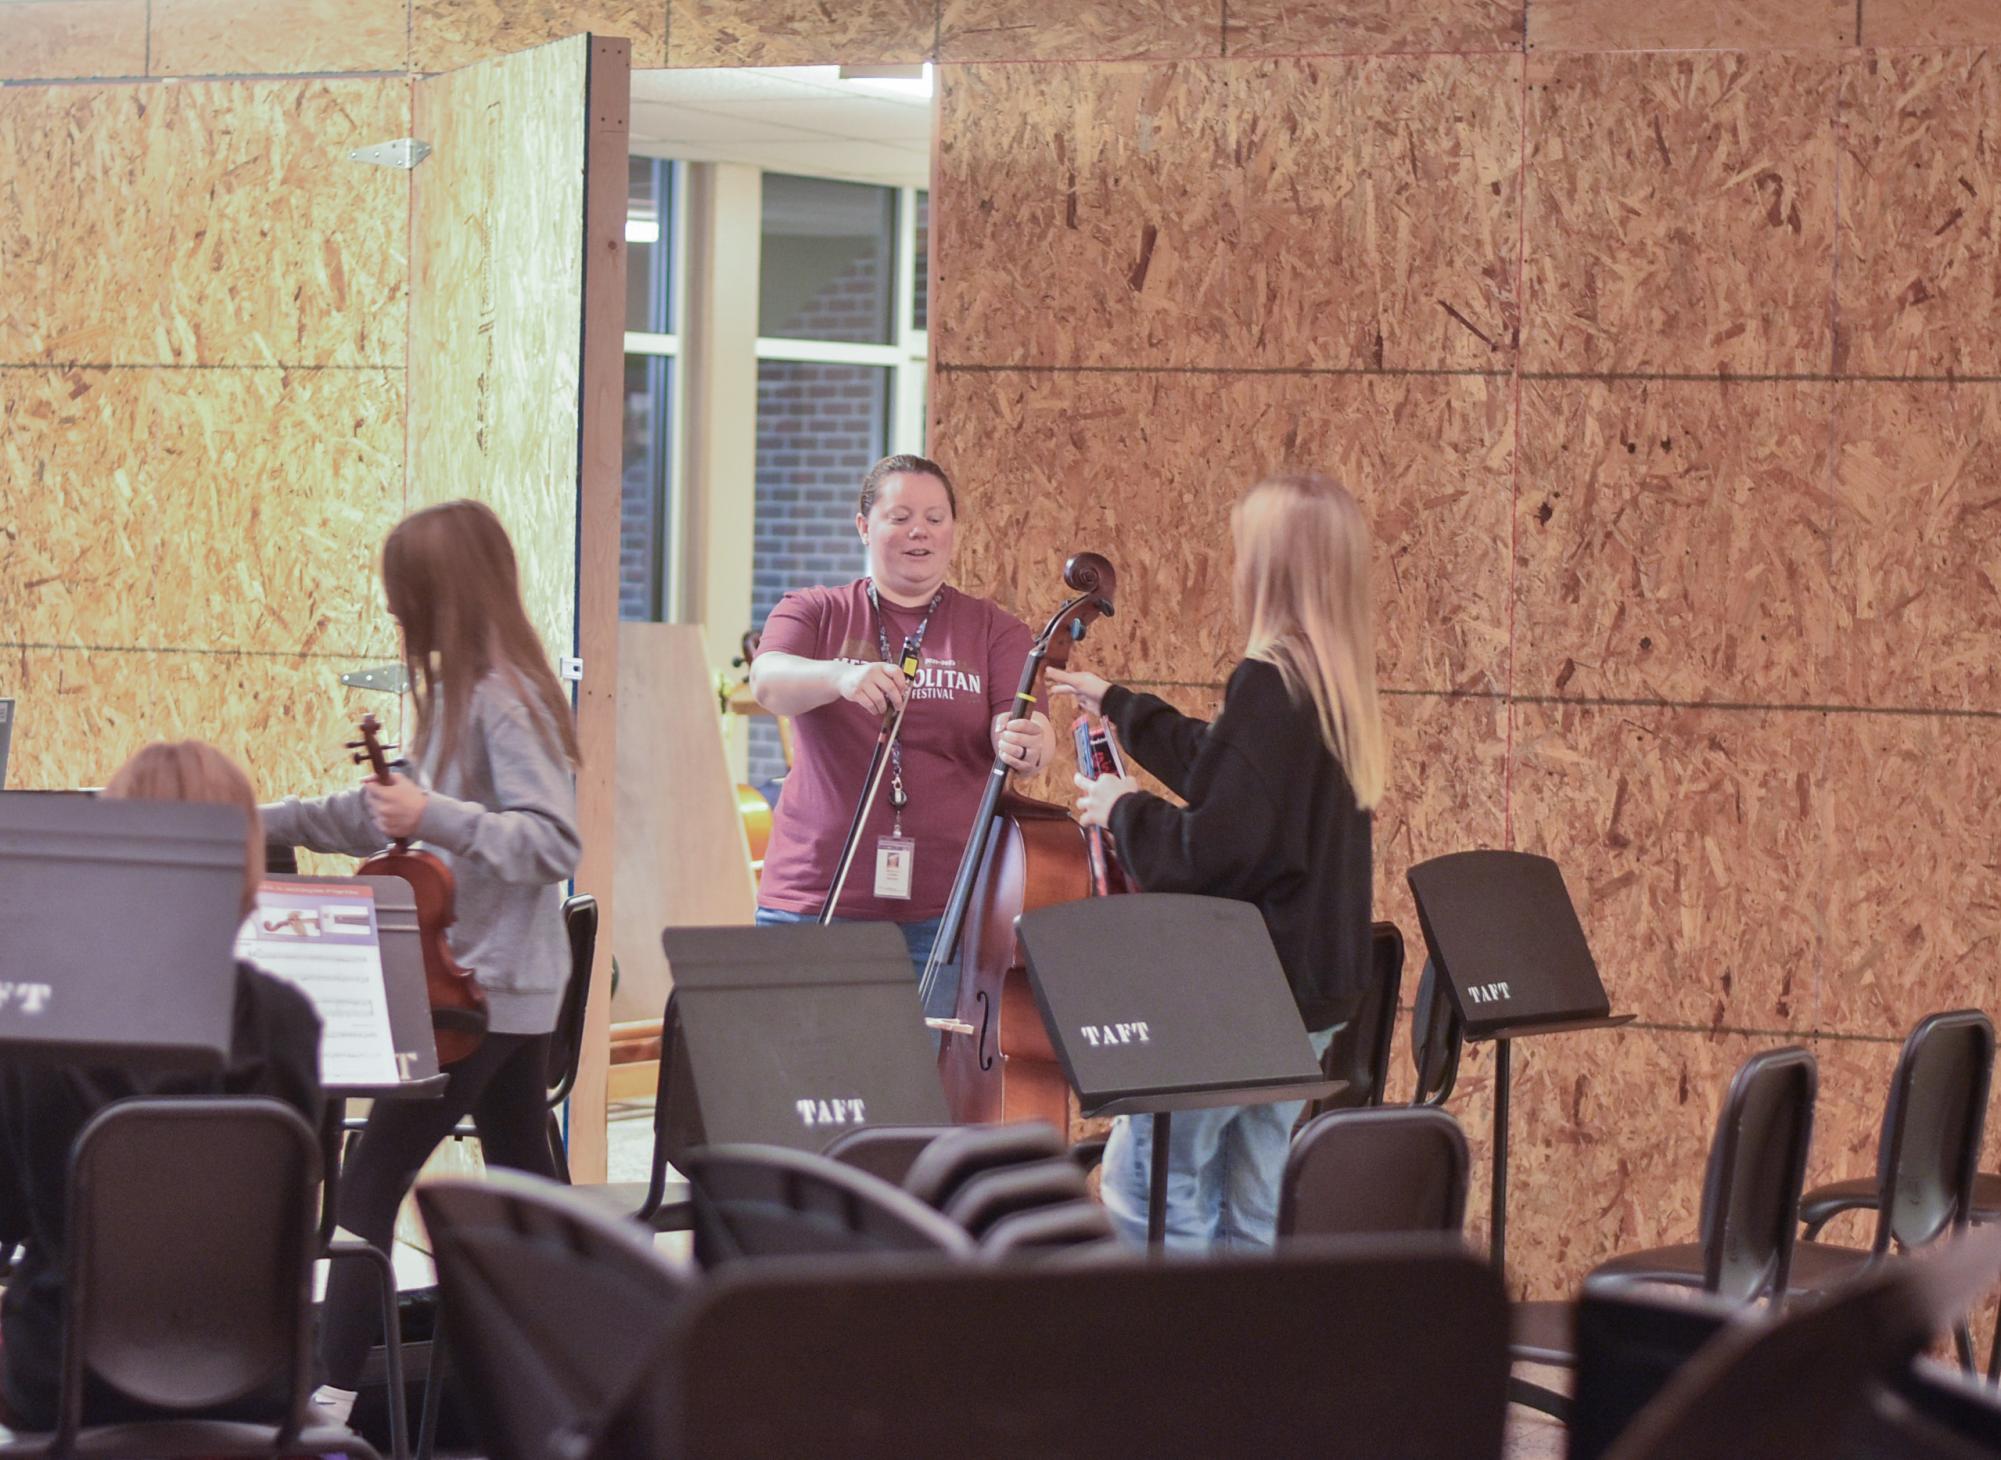 Orchestra classes being held in the foyer.